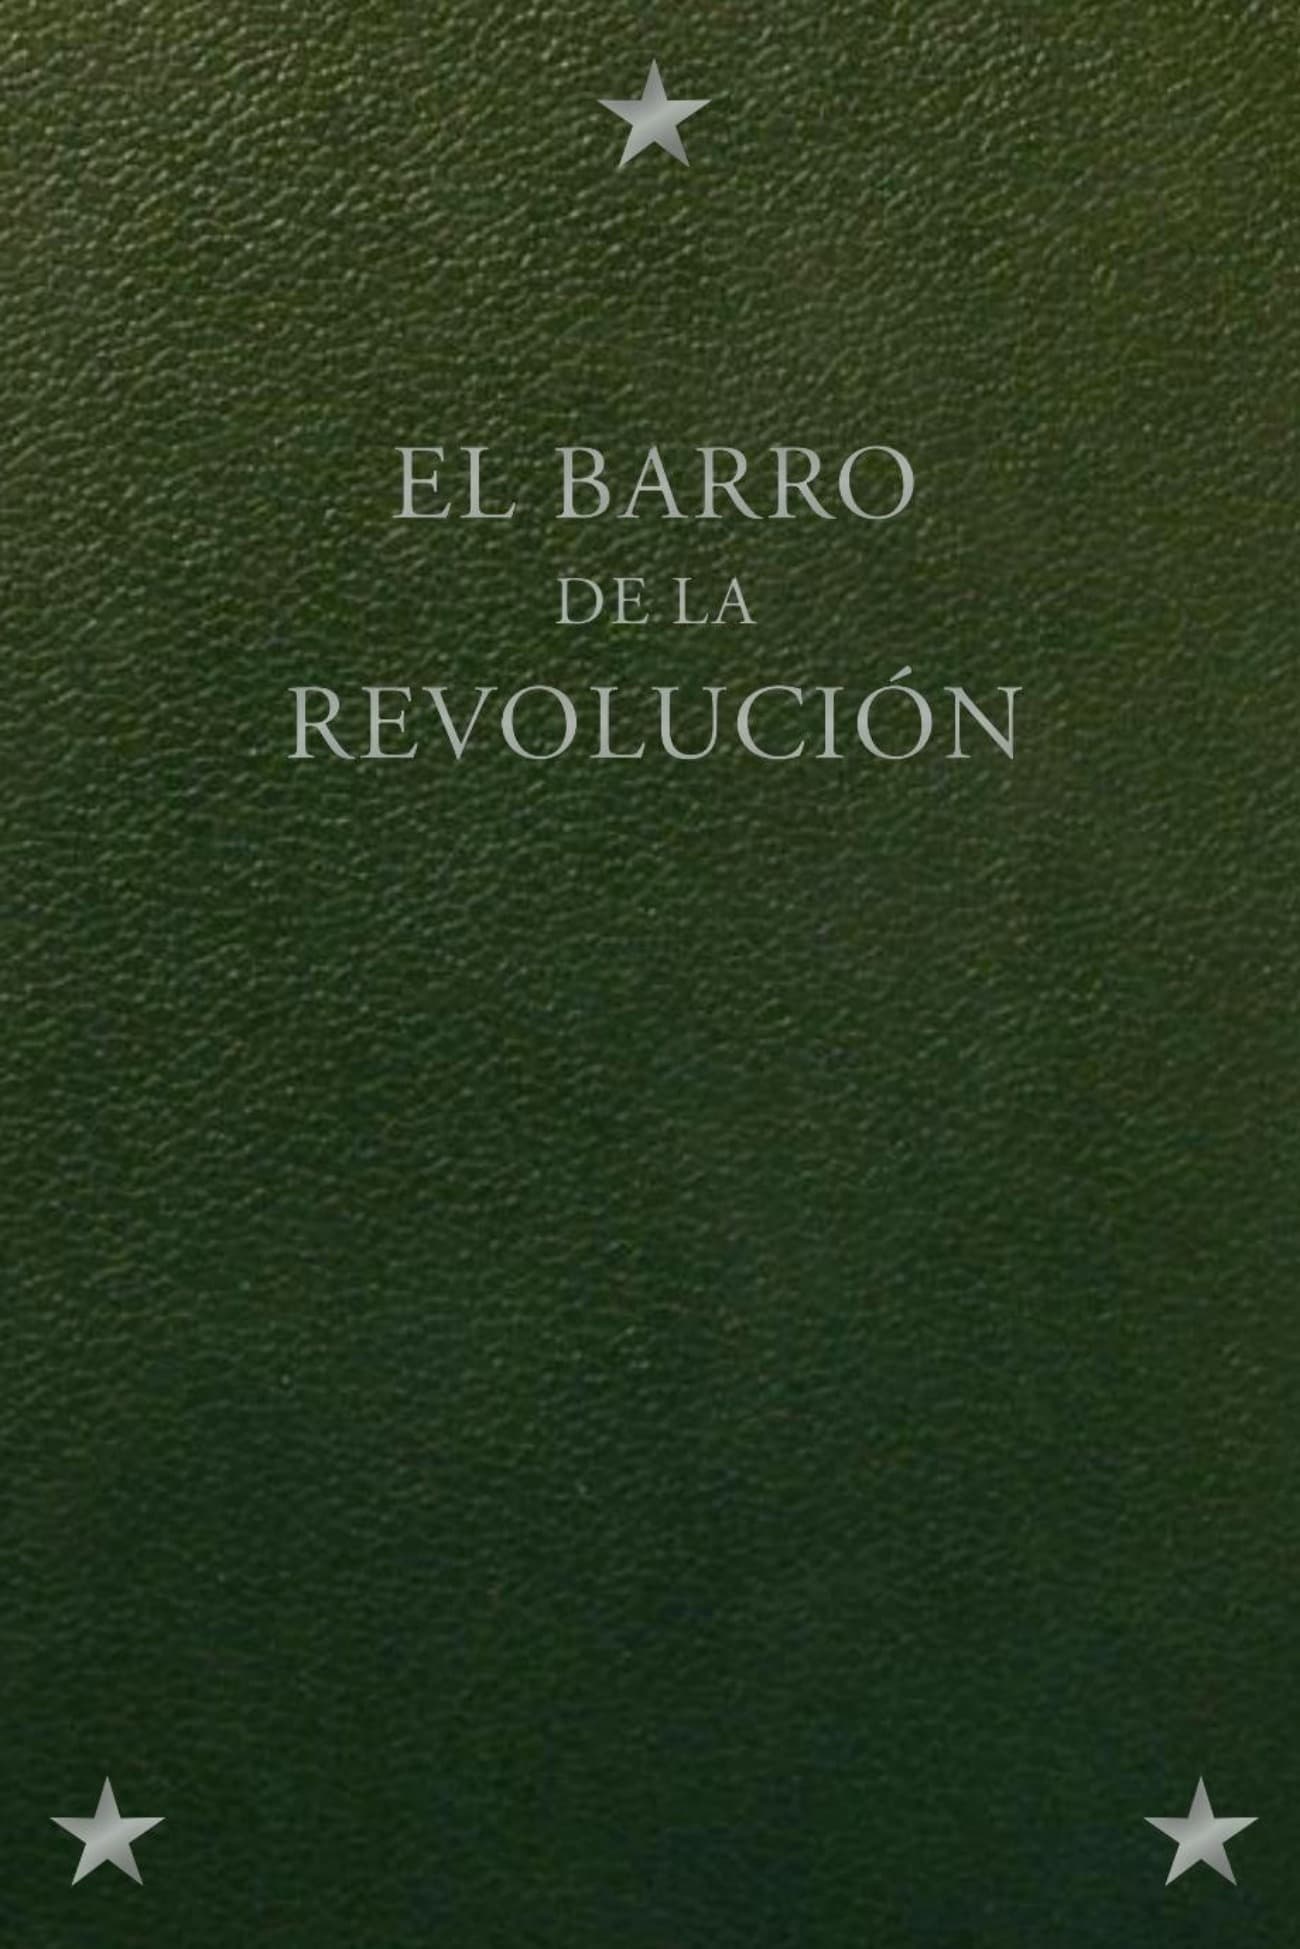 The Earth of the Revolution